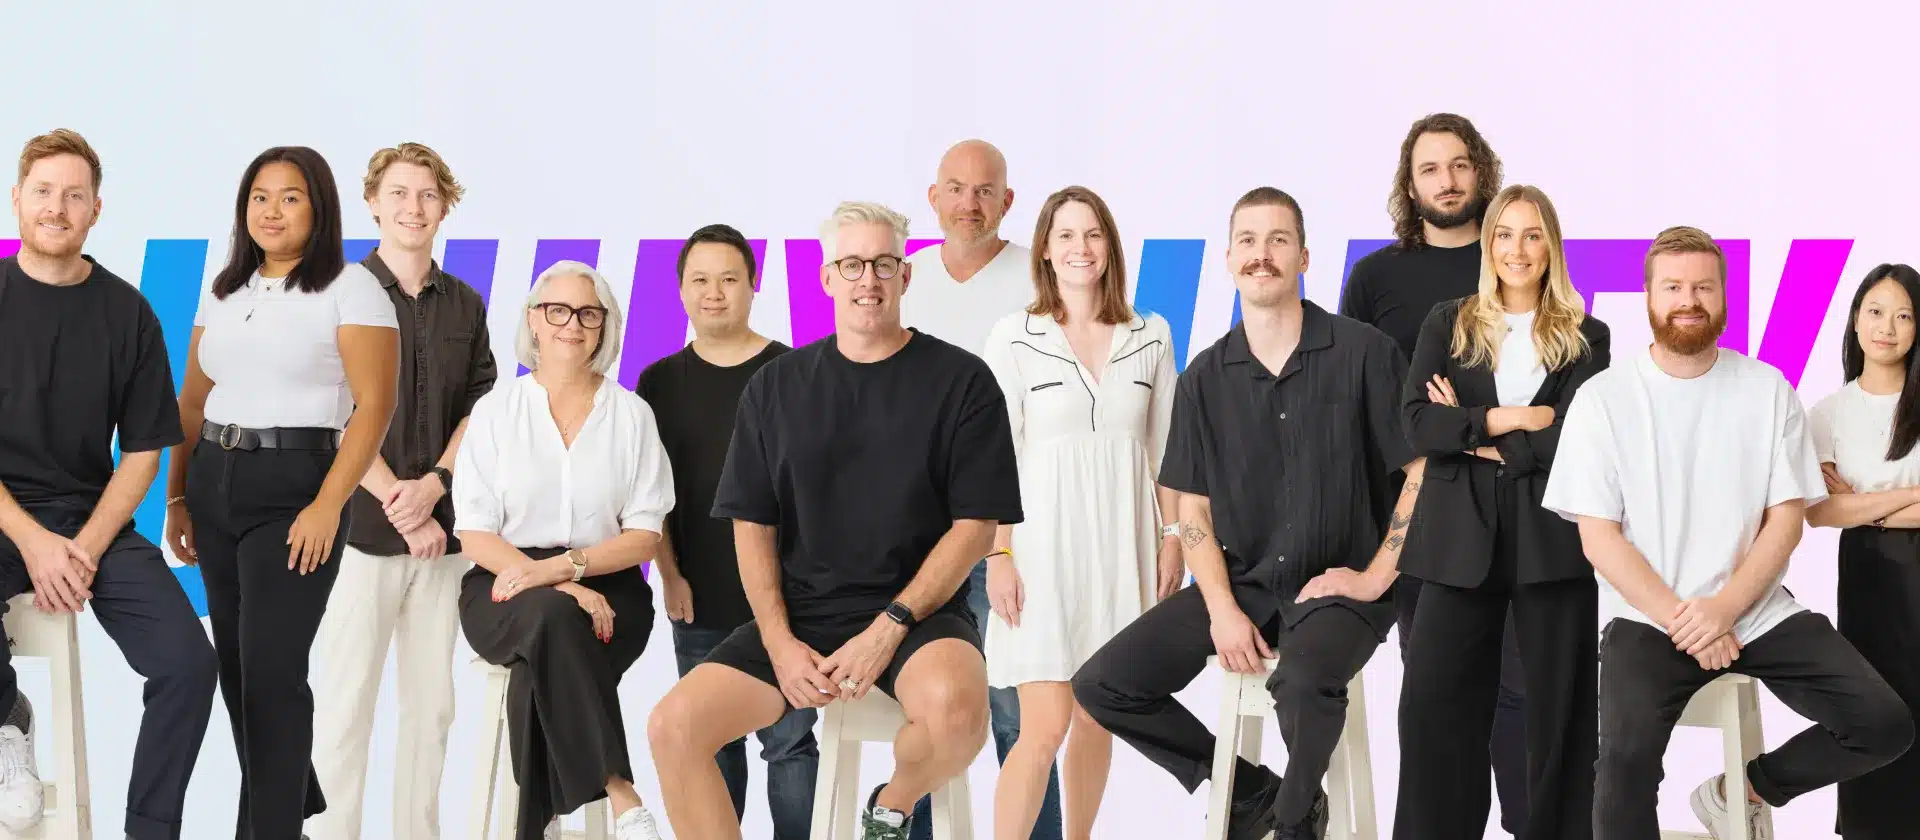 A photograph of the Unify team, superimposed onto a white background.